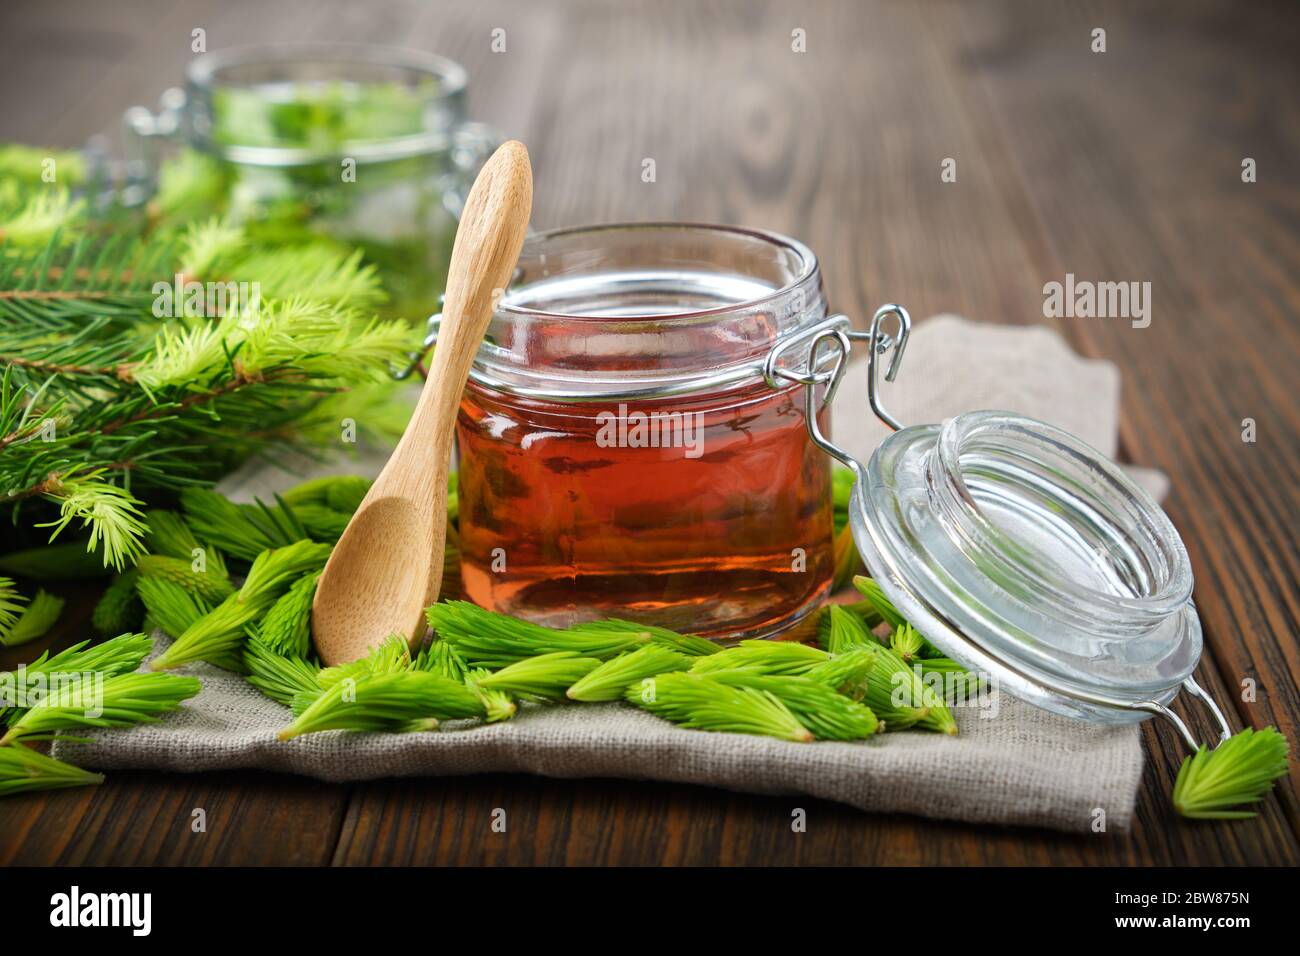 Jar of  jam, syrup or honey from fir buds and needles, twigs of fir tree on wooden table. Making spruce tips jam at home. Stock Photo